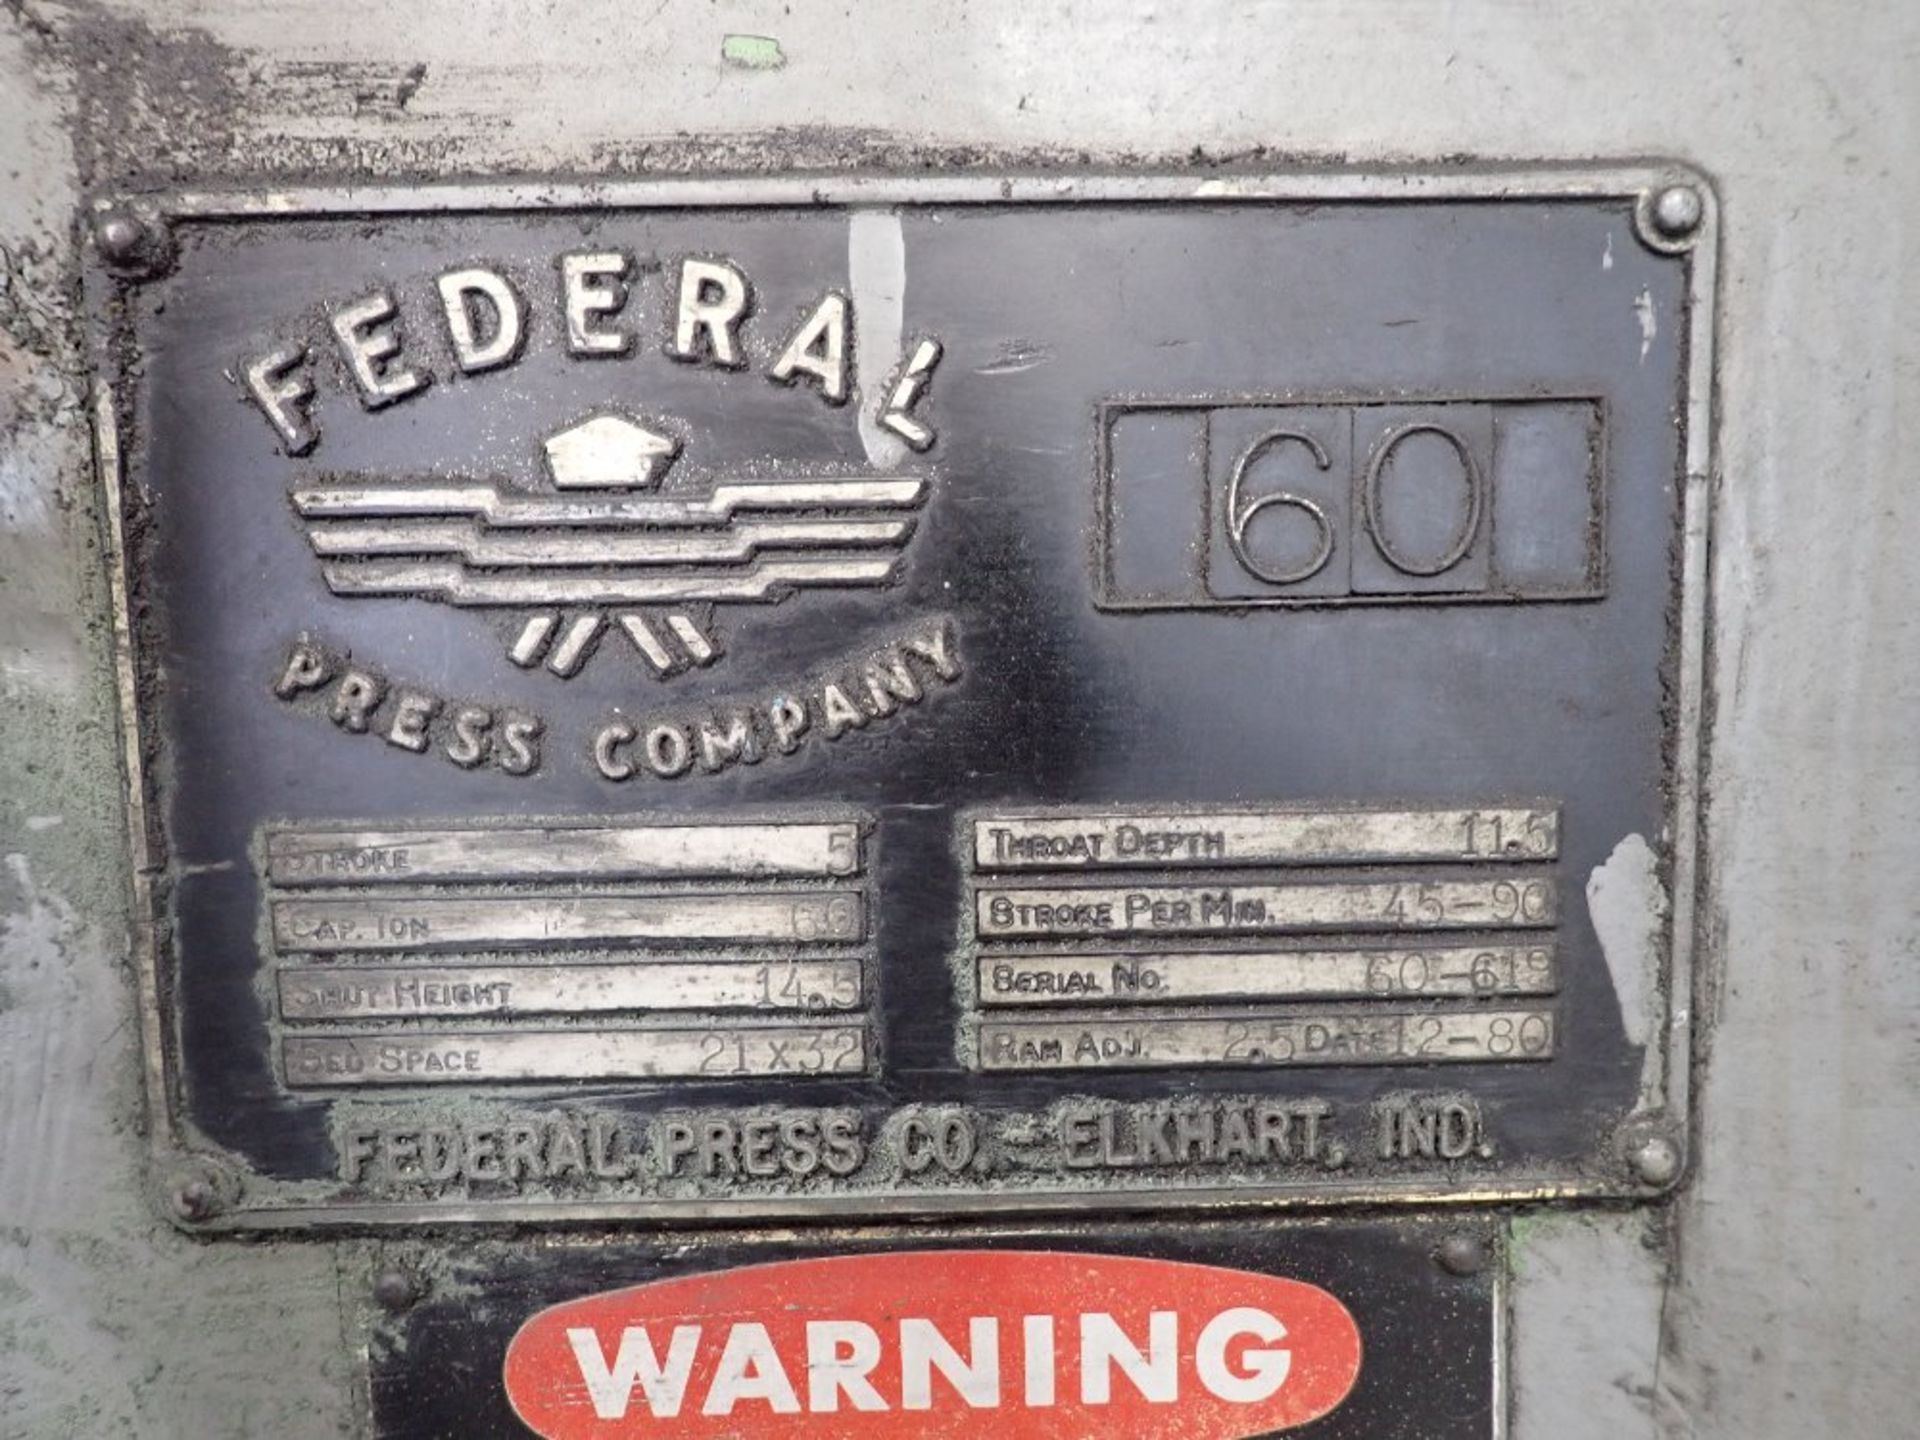 FEDERAL OBI PRESS, Model 60, Date: n/a; s/n 60-619, Approx. Capacity: 60 TONS, Power: n/a, - Image 3 of 21